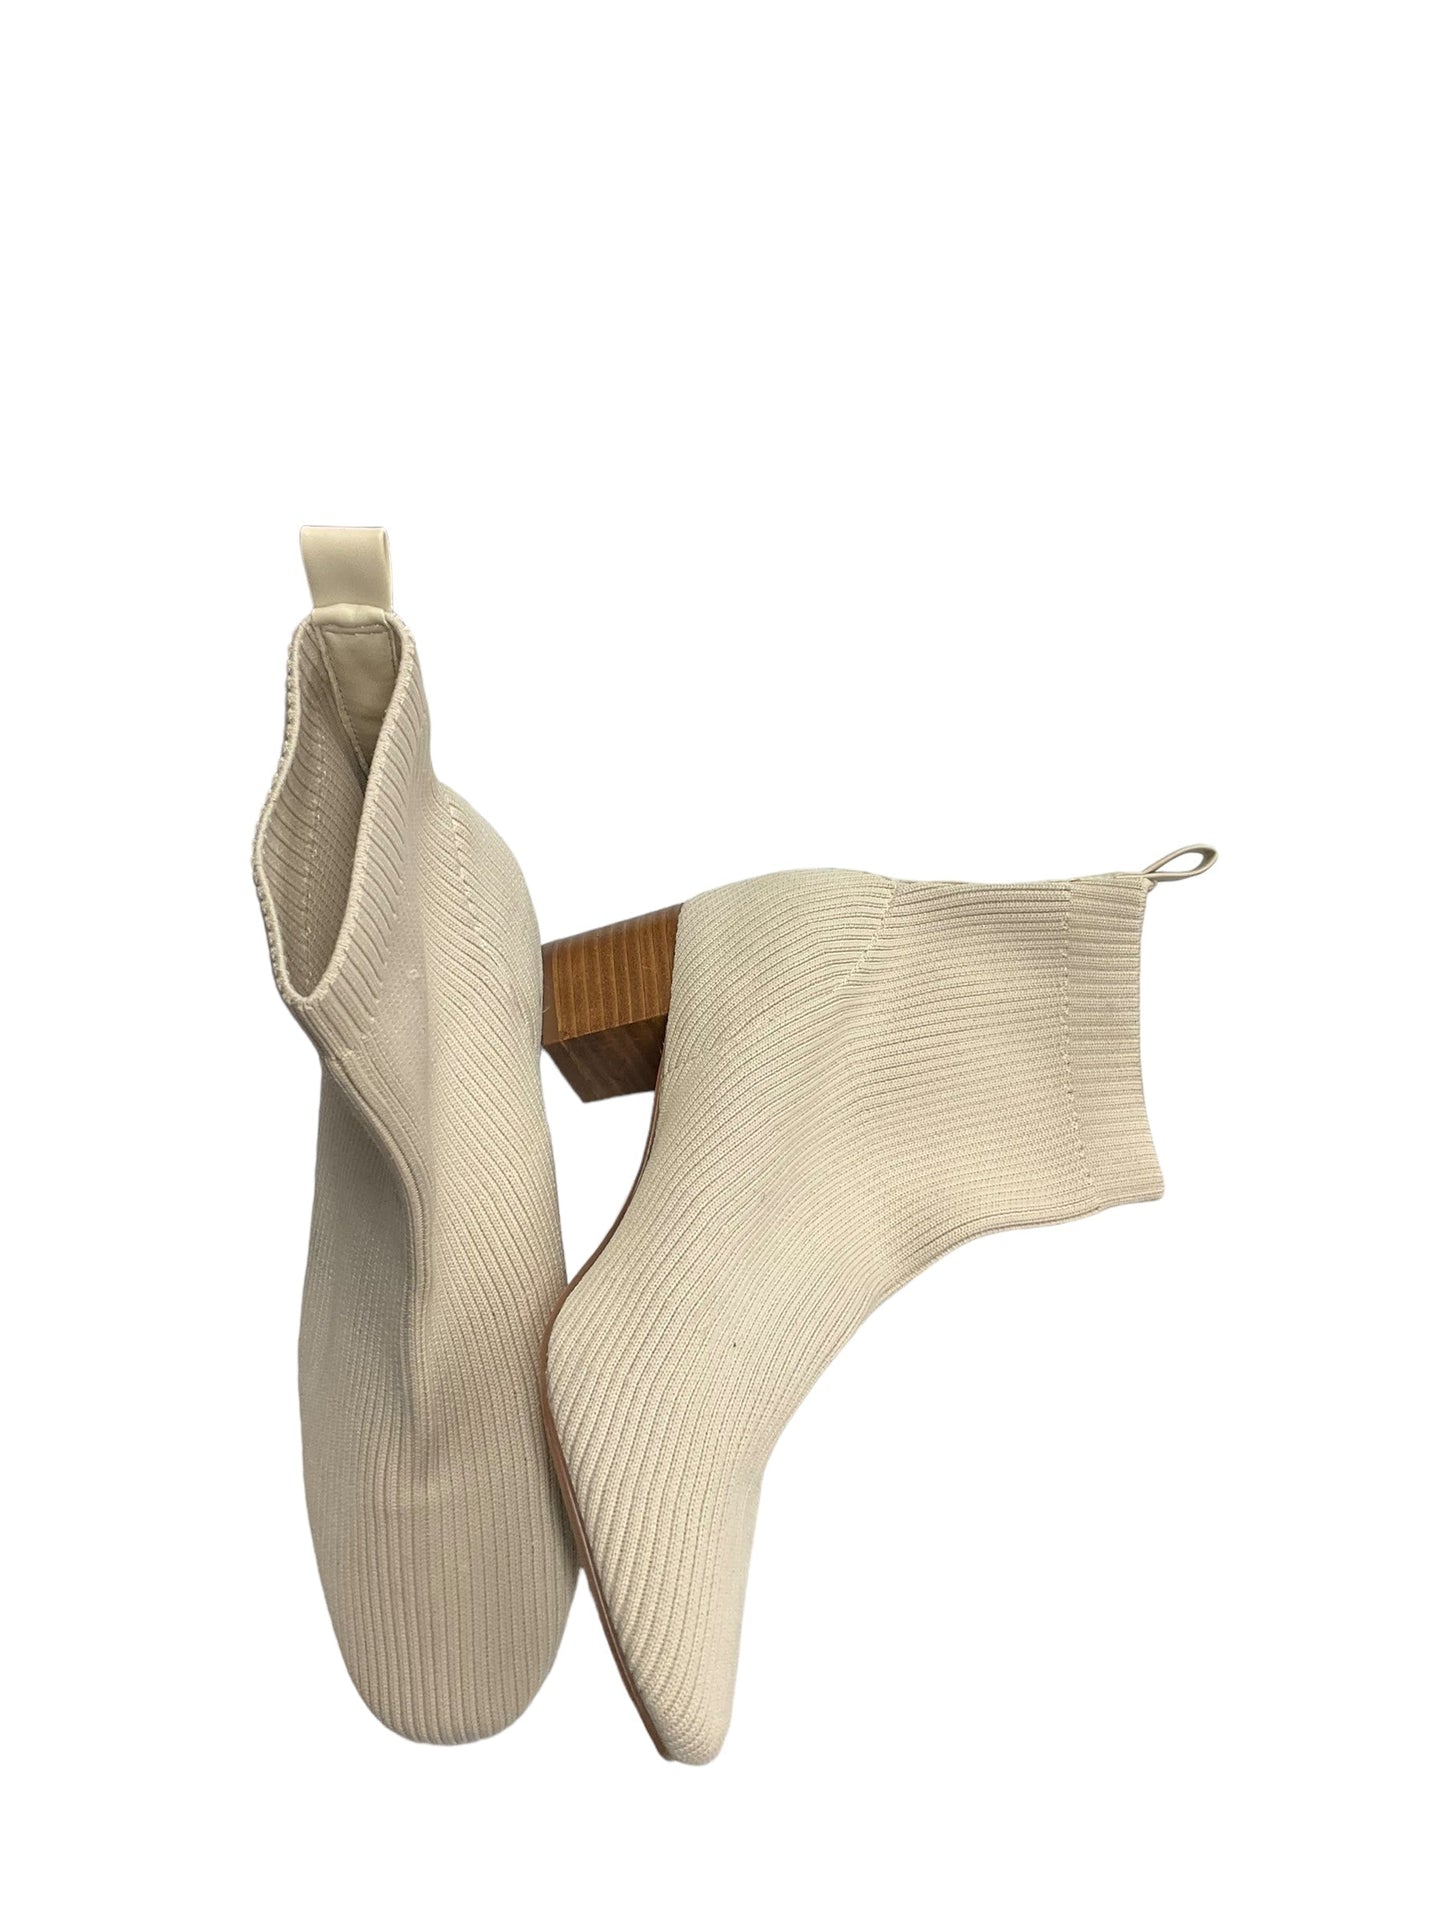 Cream Boots Ankle Heels Joie, Size 9